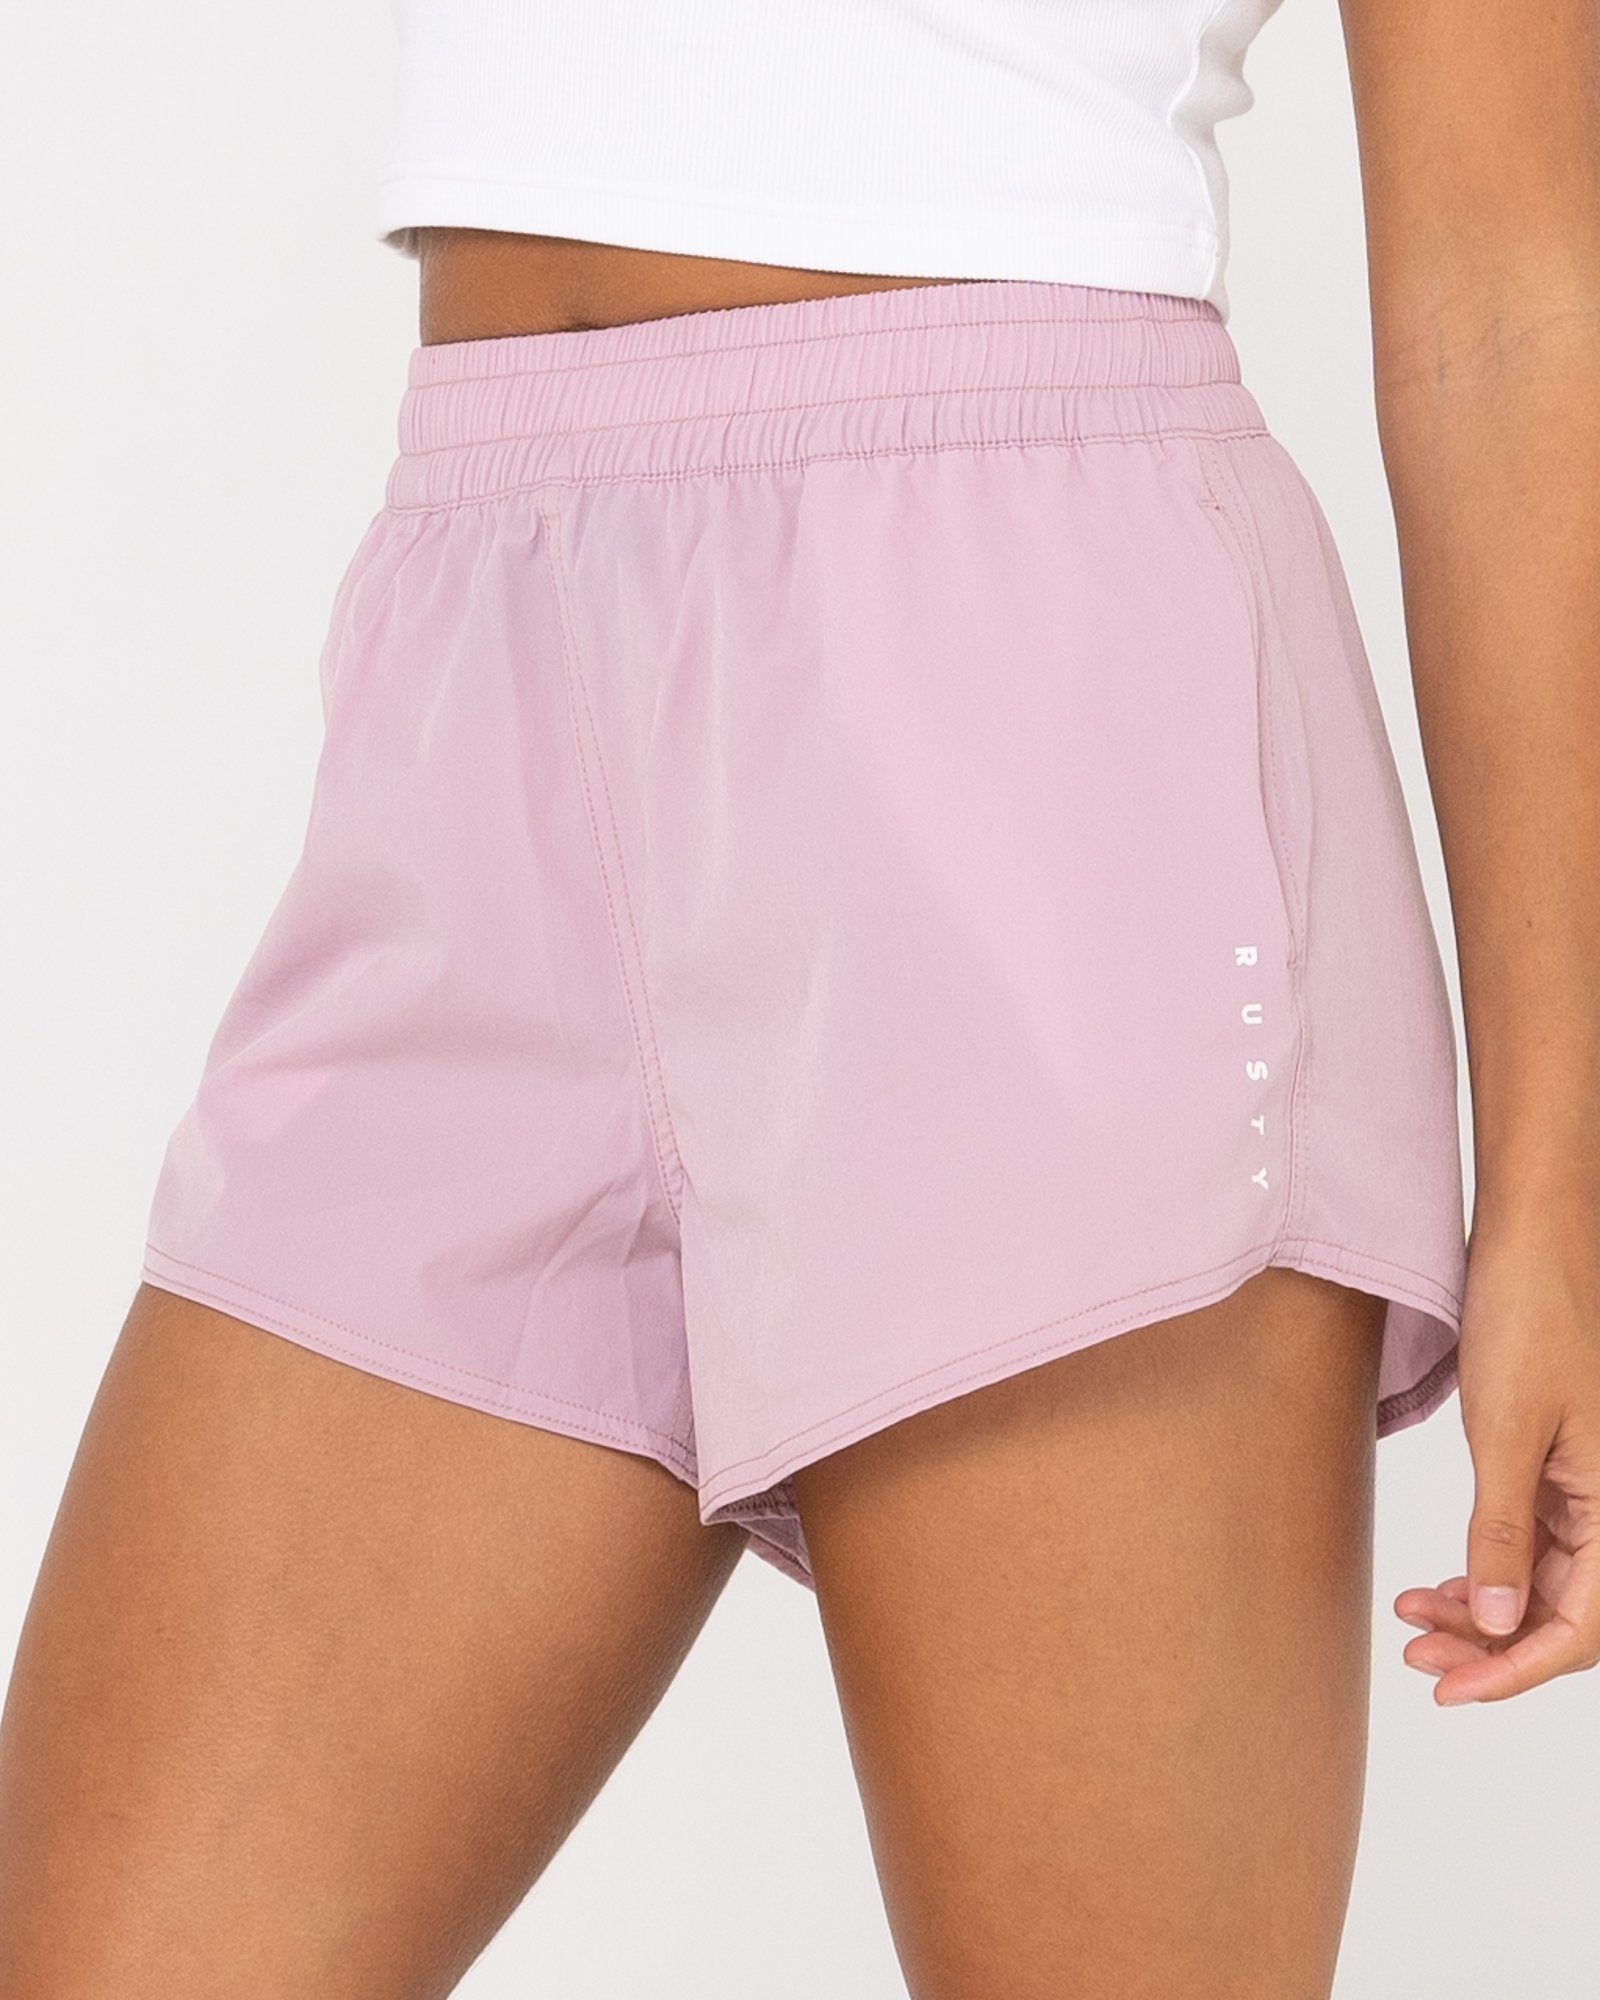 LILAC MEELUP Rusty SHORT PINK Trainingsshorts